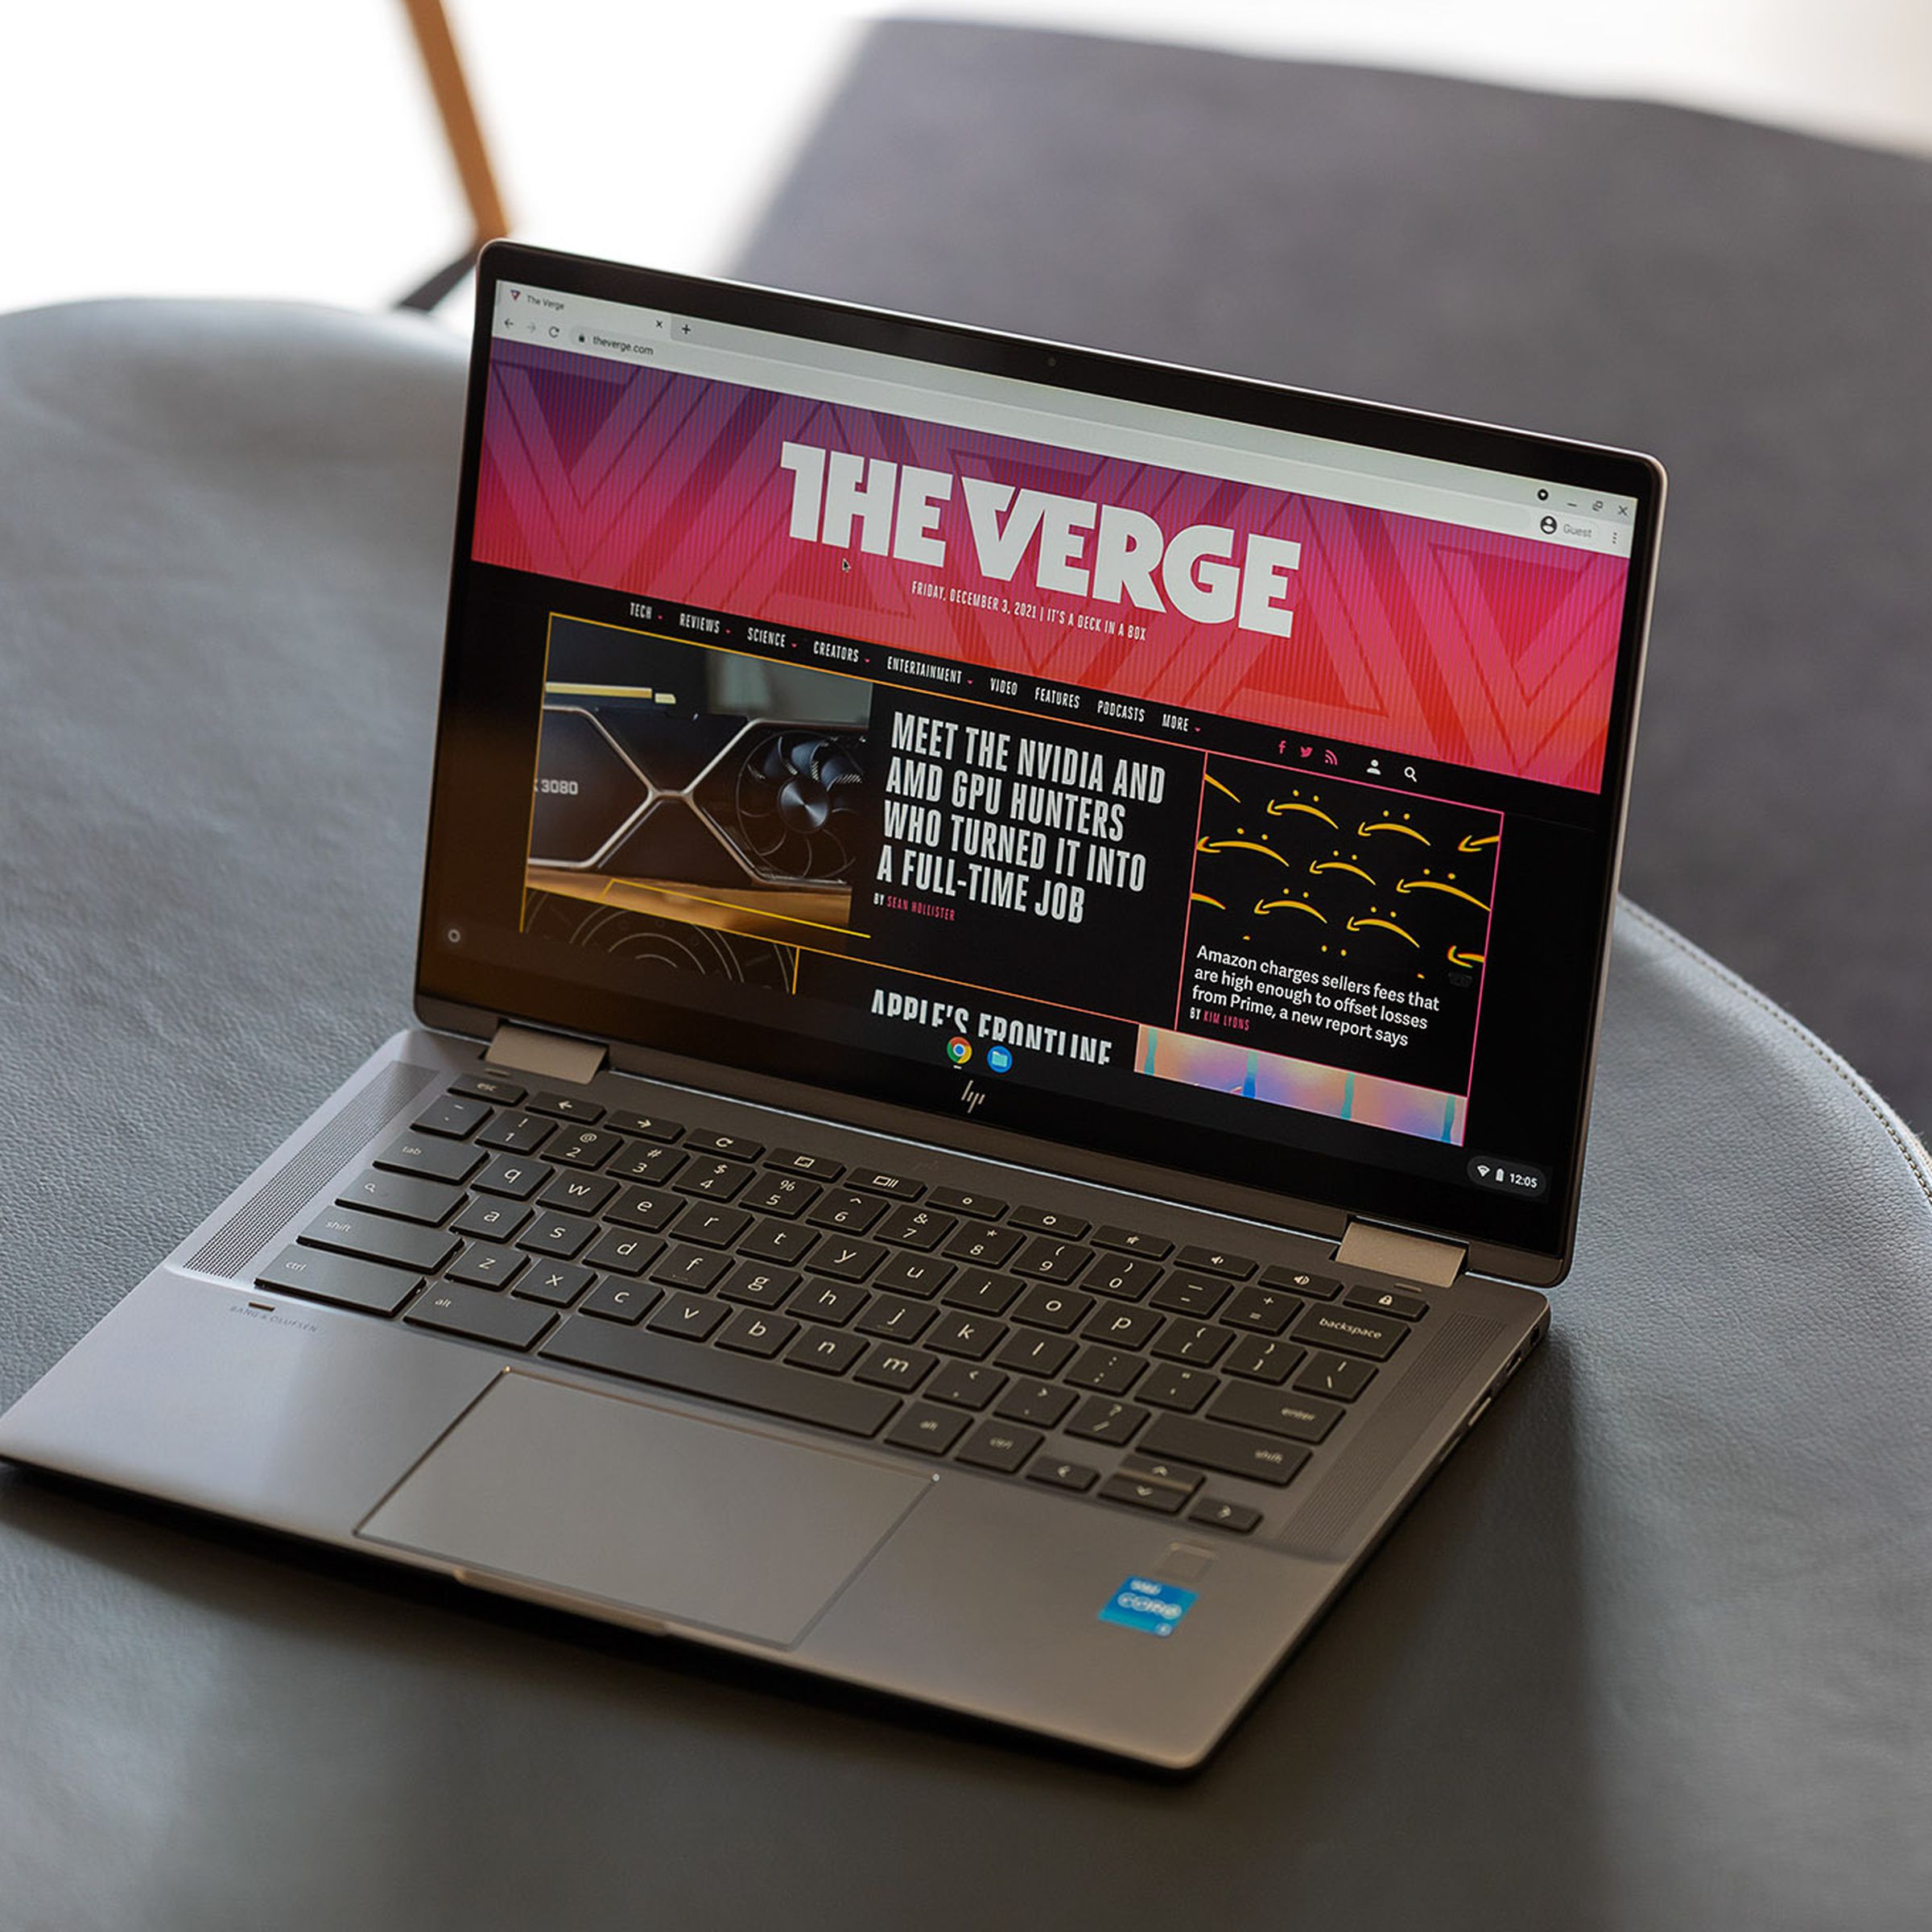 The HP Chromebook x360 14c open on a gray bench seen from above and to the right. The screen displays The Verge homepage.